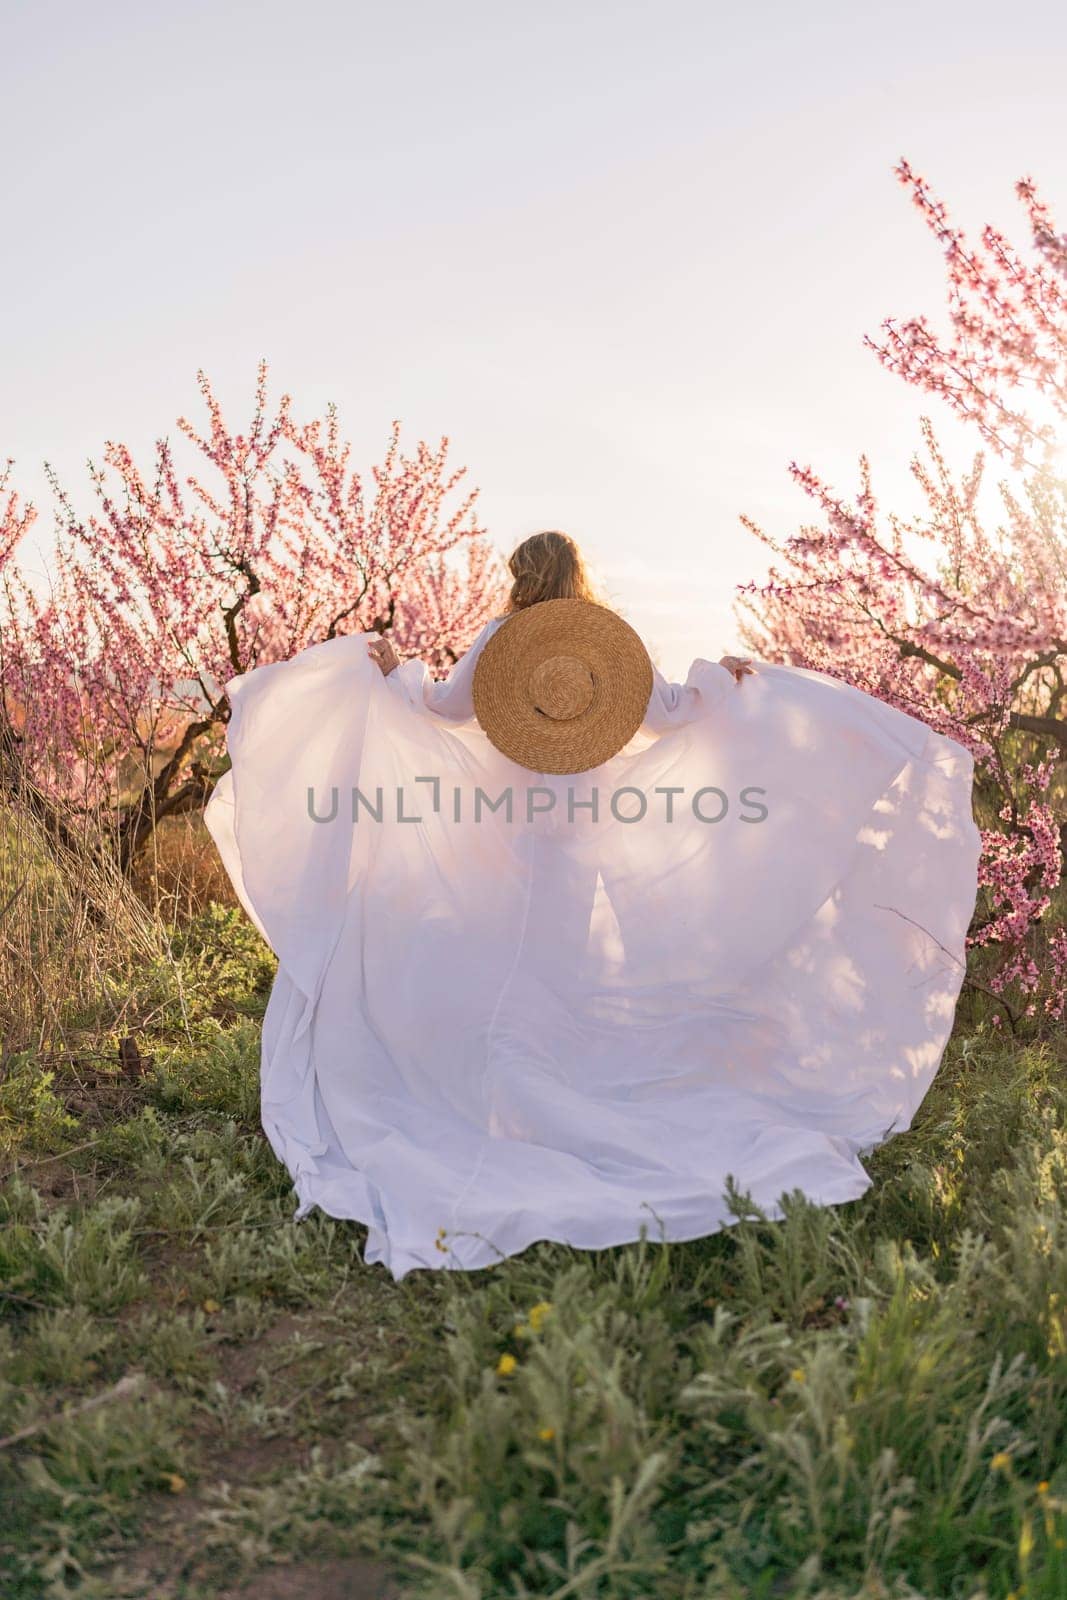 Woman blooming peach orchard. Against the backdrop of a picturesque peach orchard, a woman in a long white dress and hat enjoys a peaceful walk in the park, surrounded by the beauty of nature